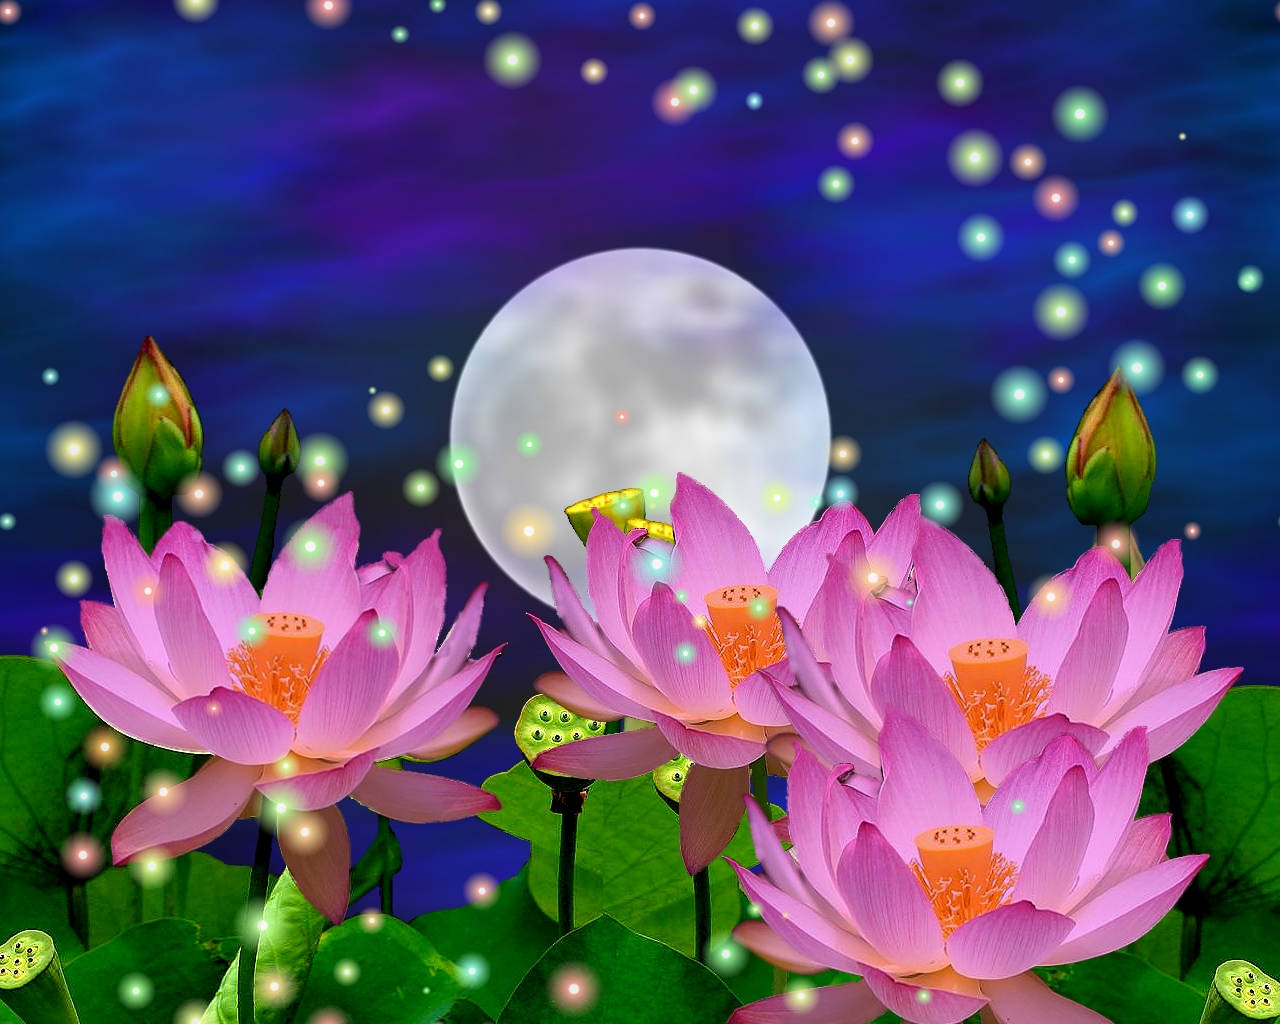 Lotus Flowers And The Moon Wallpaper